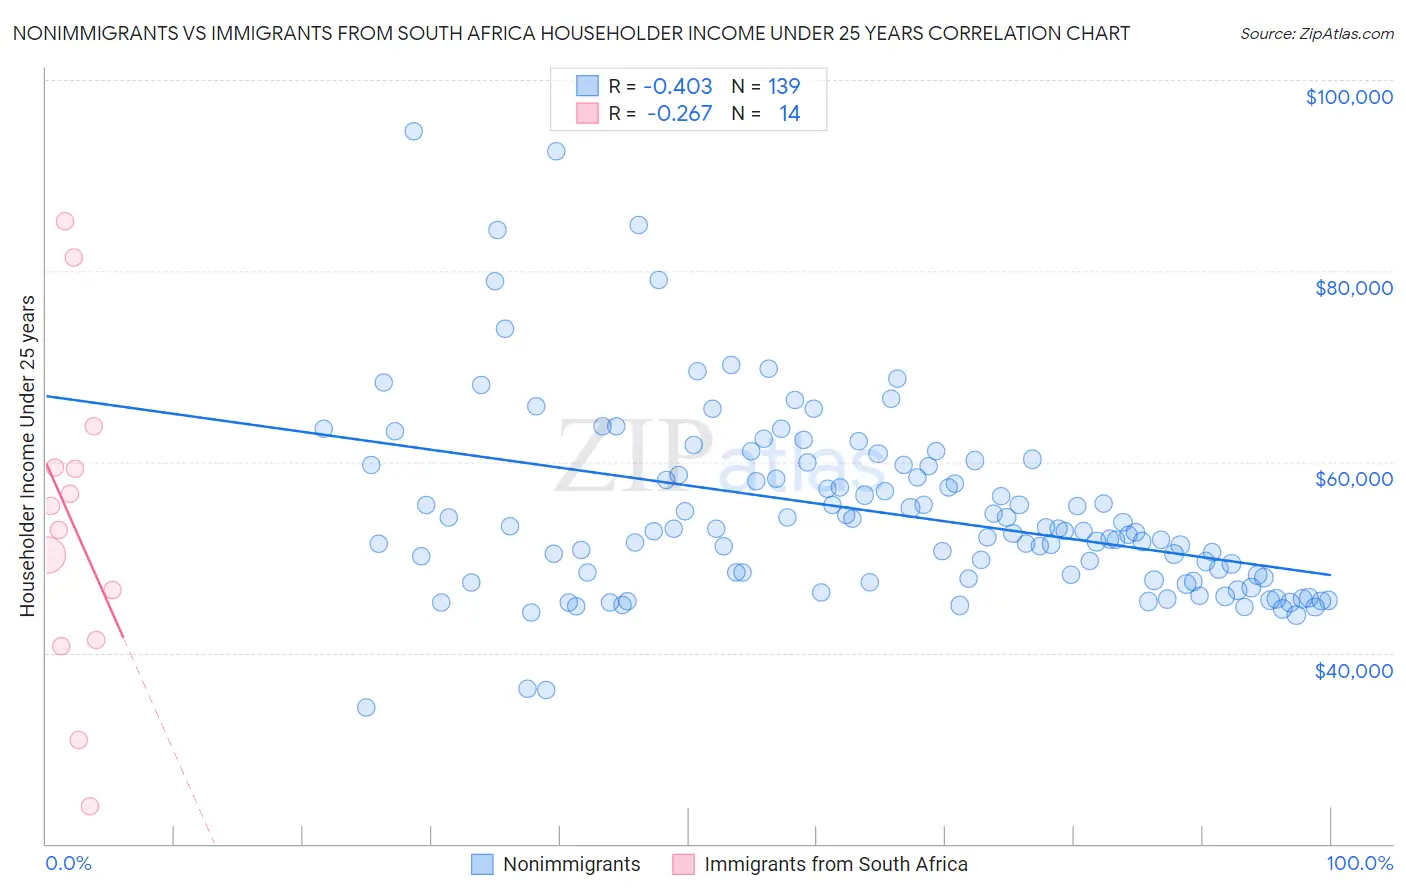 Nonimmigrants vs Immigrants from South Africa Householder Income Under 25 years